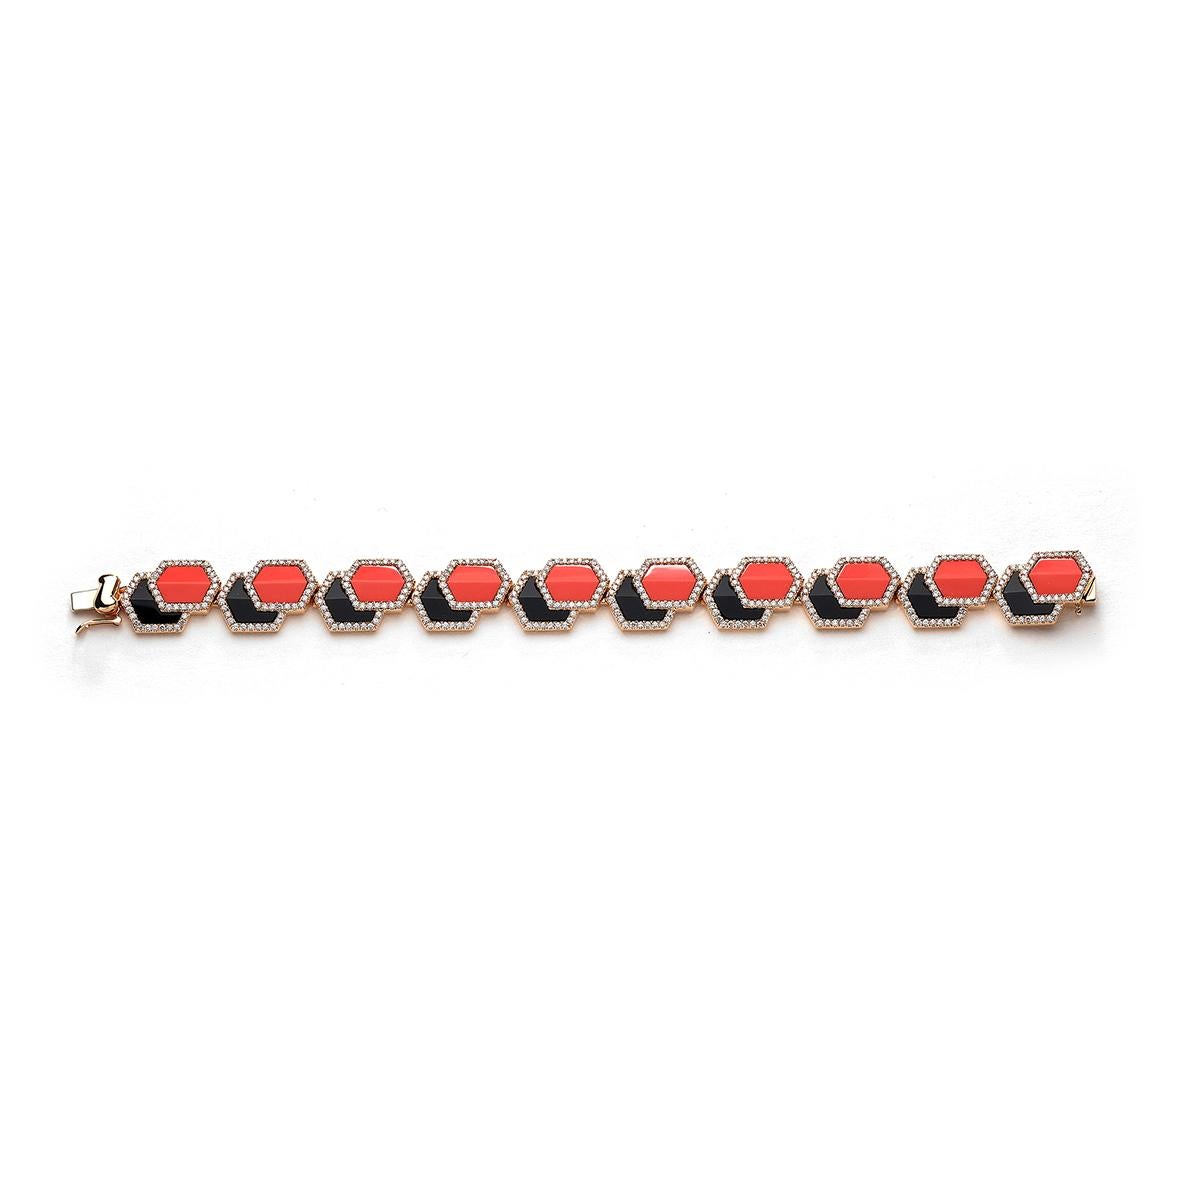 Bracelet in 18kt pink gold set with 440 diamonds 2.93 cts, 10 onyx 7.08 cts and 10 coral 11.21 cts